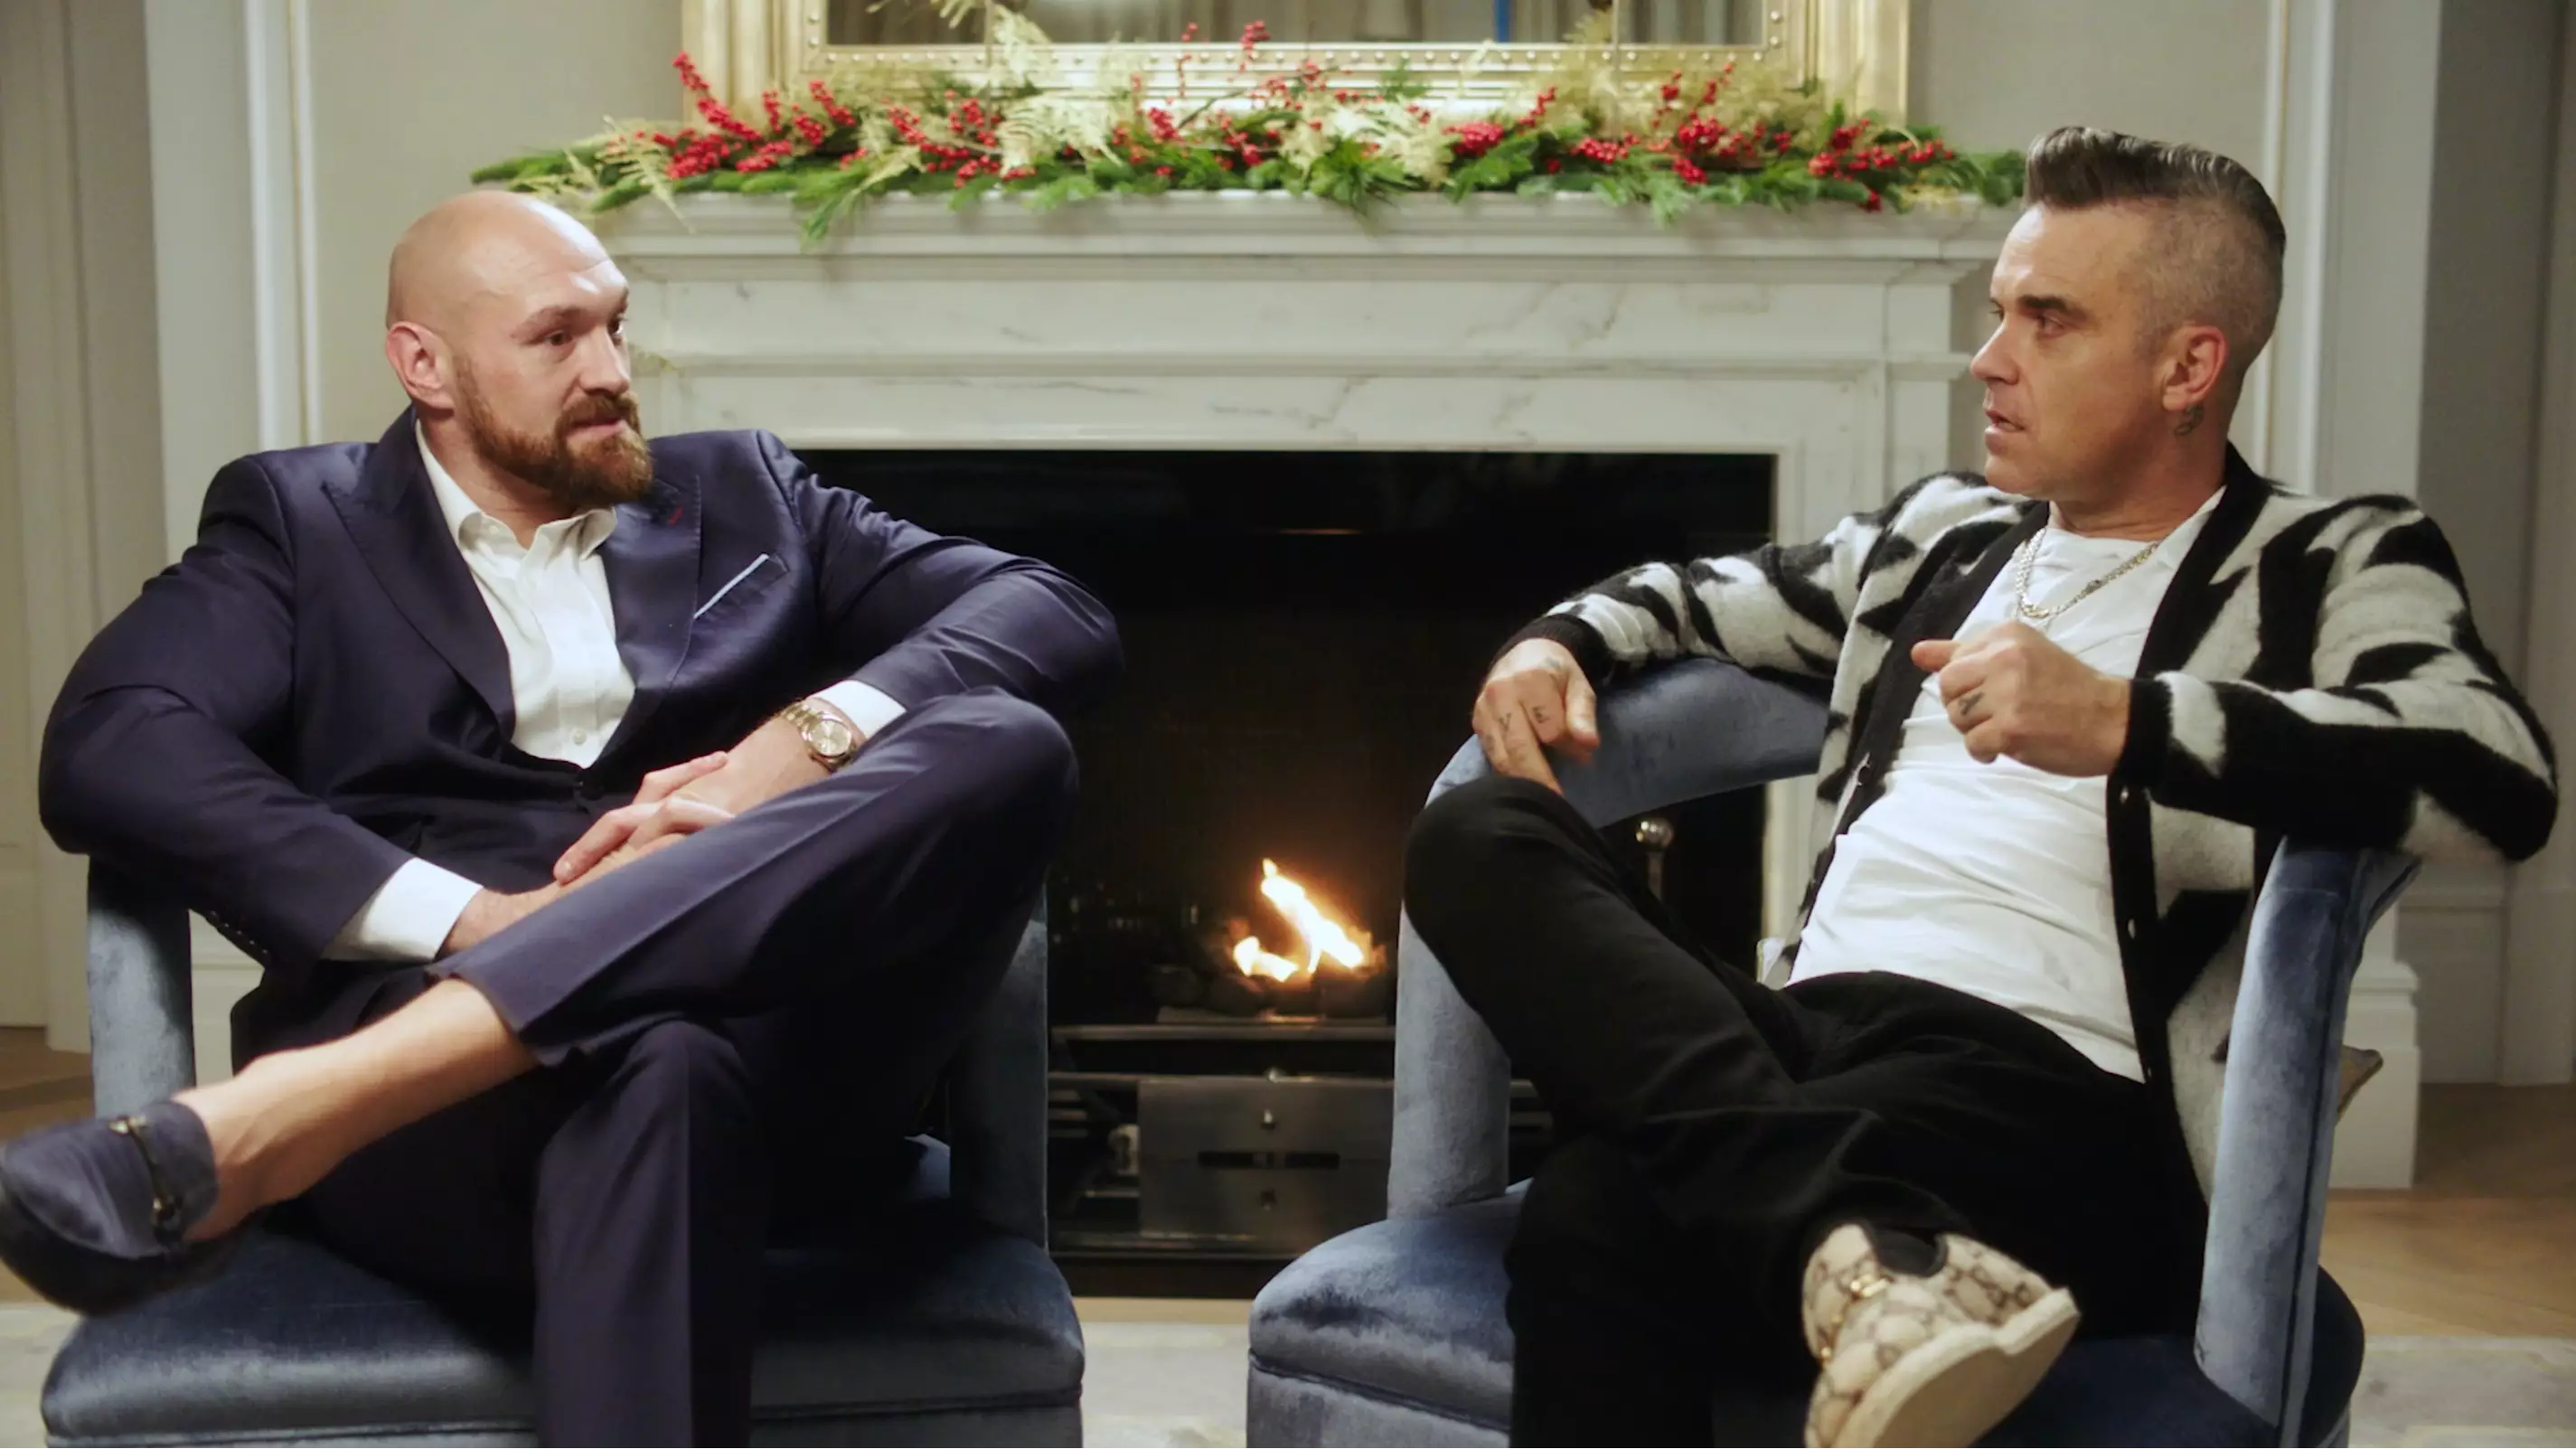 Robbie Williams And Tyson Fury Discuss Their Lowest Moments